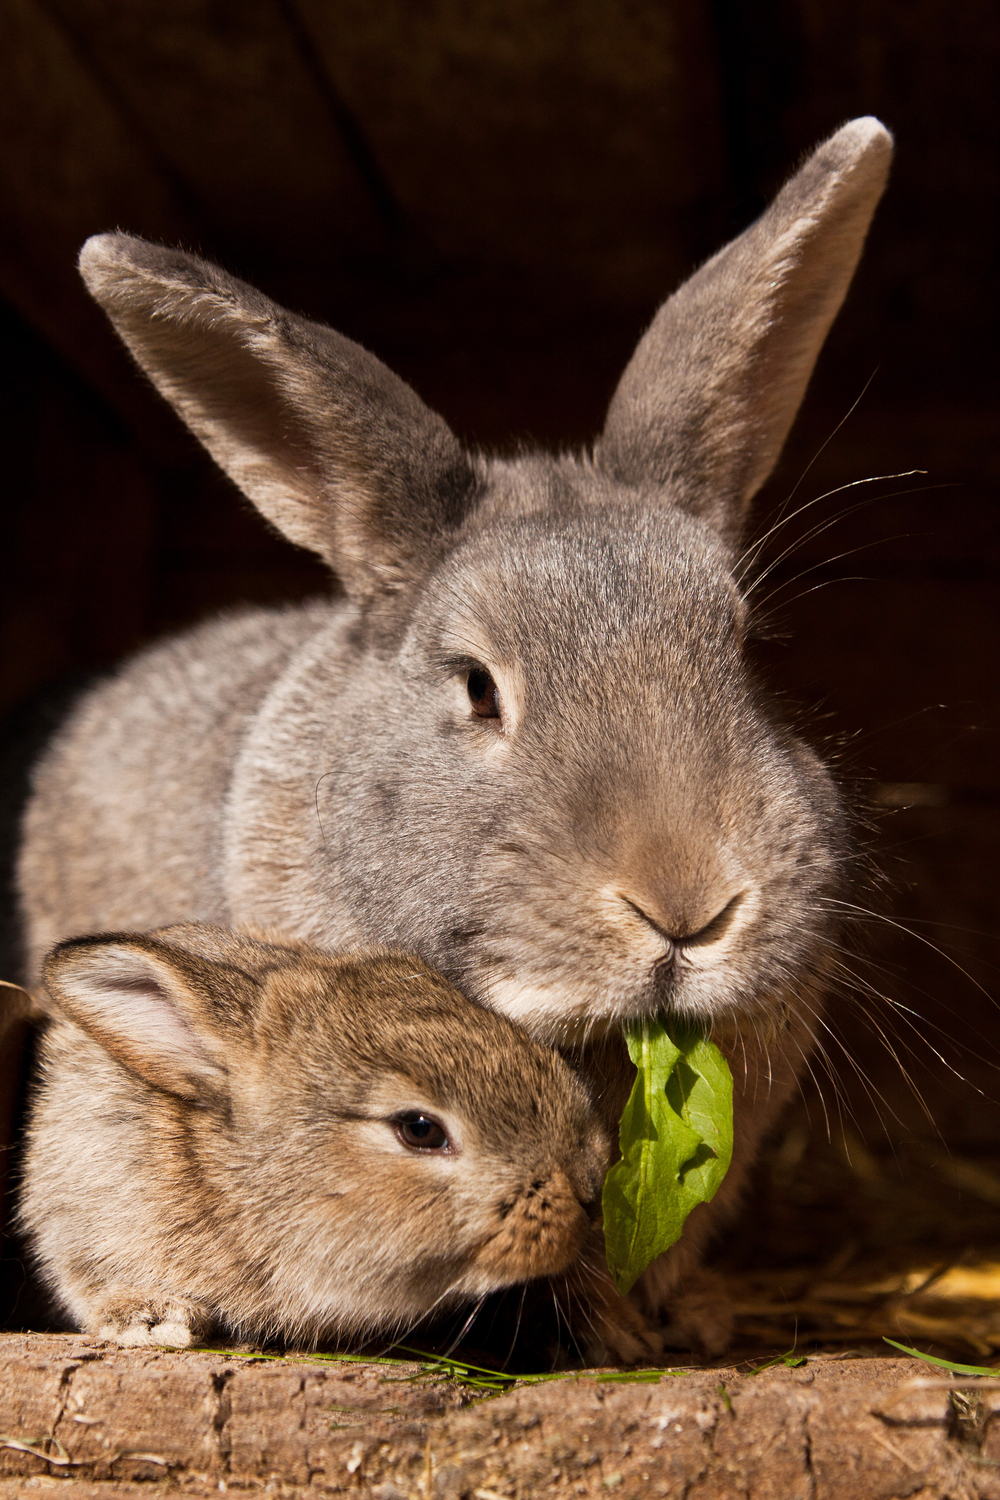 How To Stop A Rabbit From Eating Her Babies?